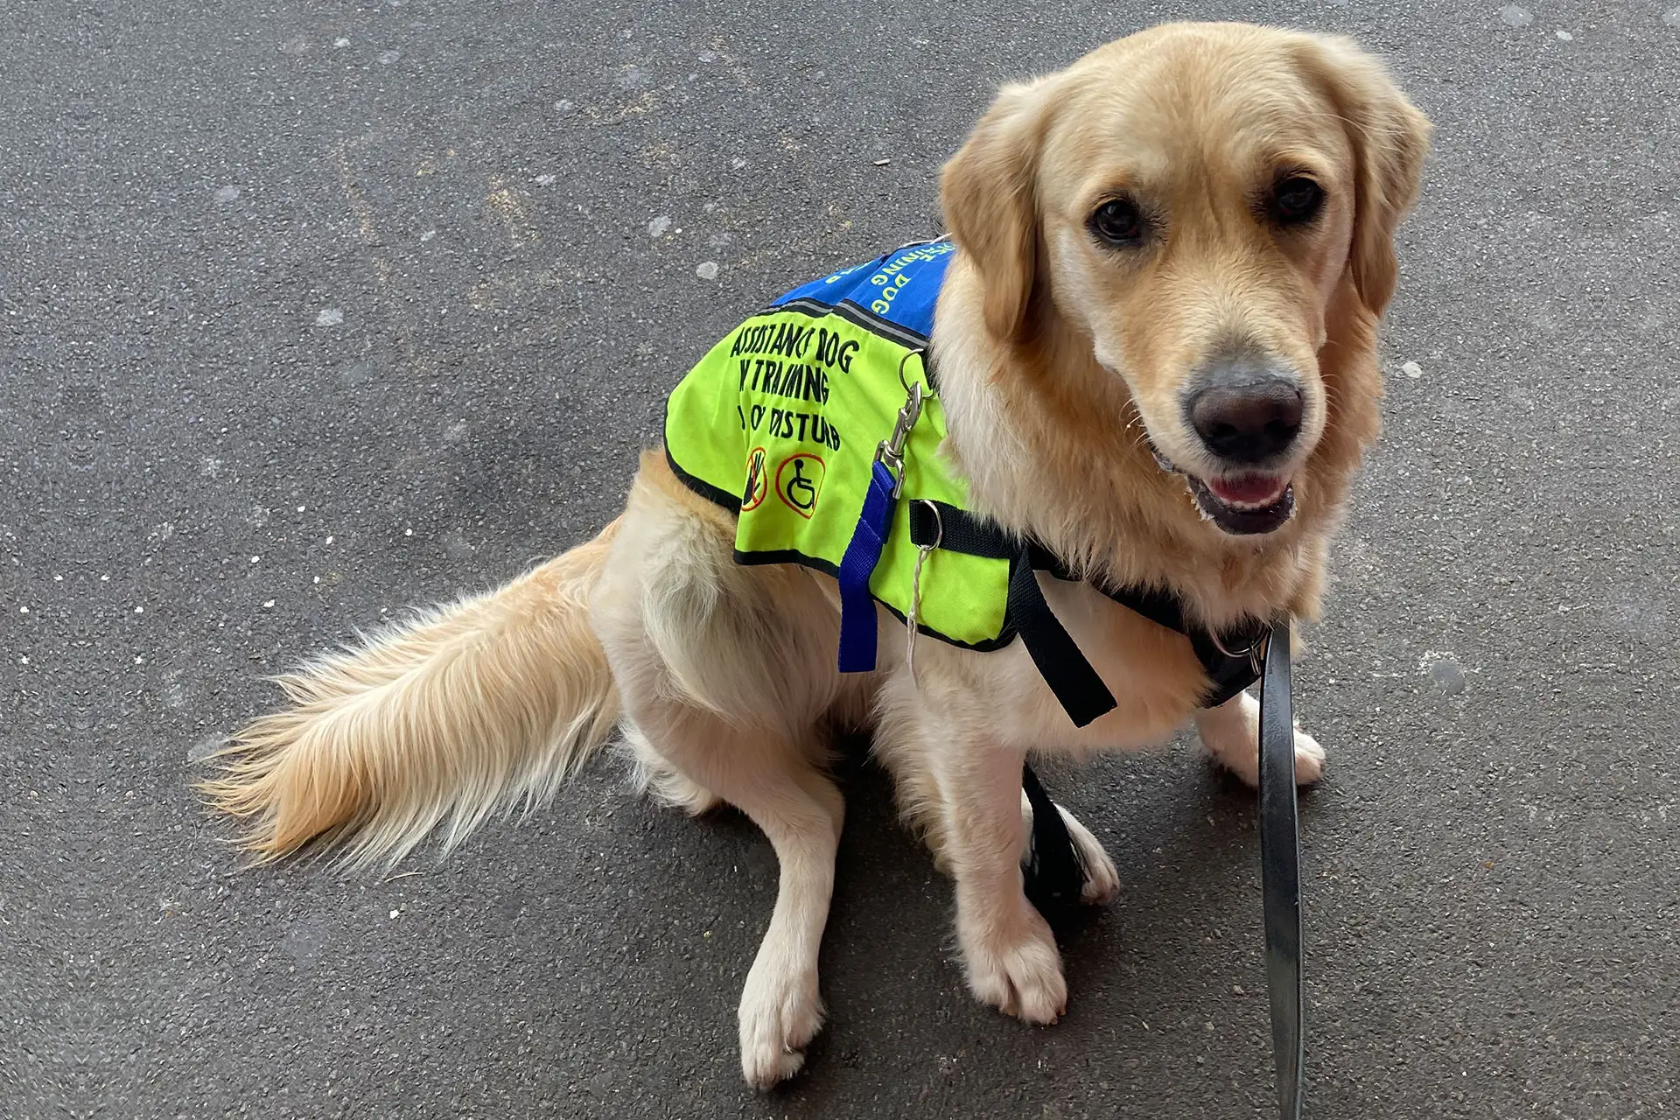 Golden retriever wearing a assistant dog in training vest